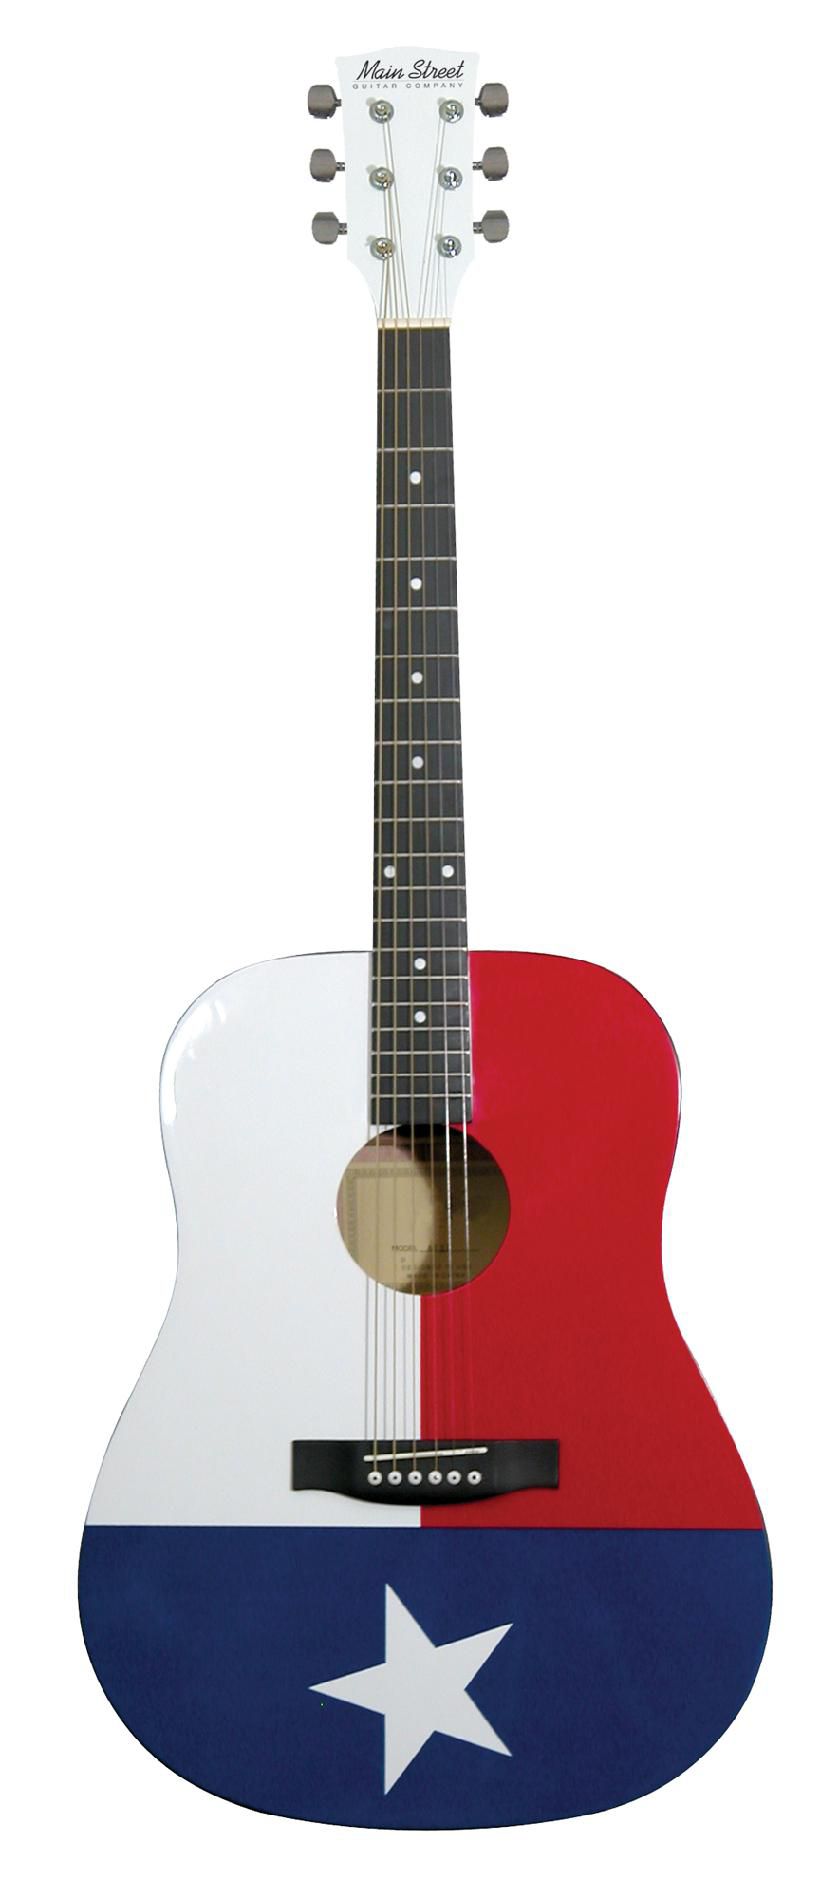 Main Street Dreadnought Acoustic Guitar with Texas Flag on High-Gloss White Finish